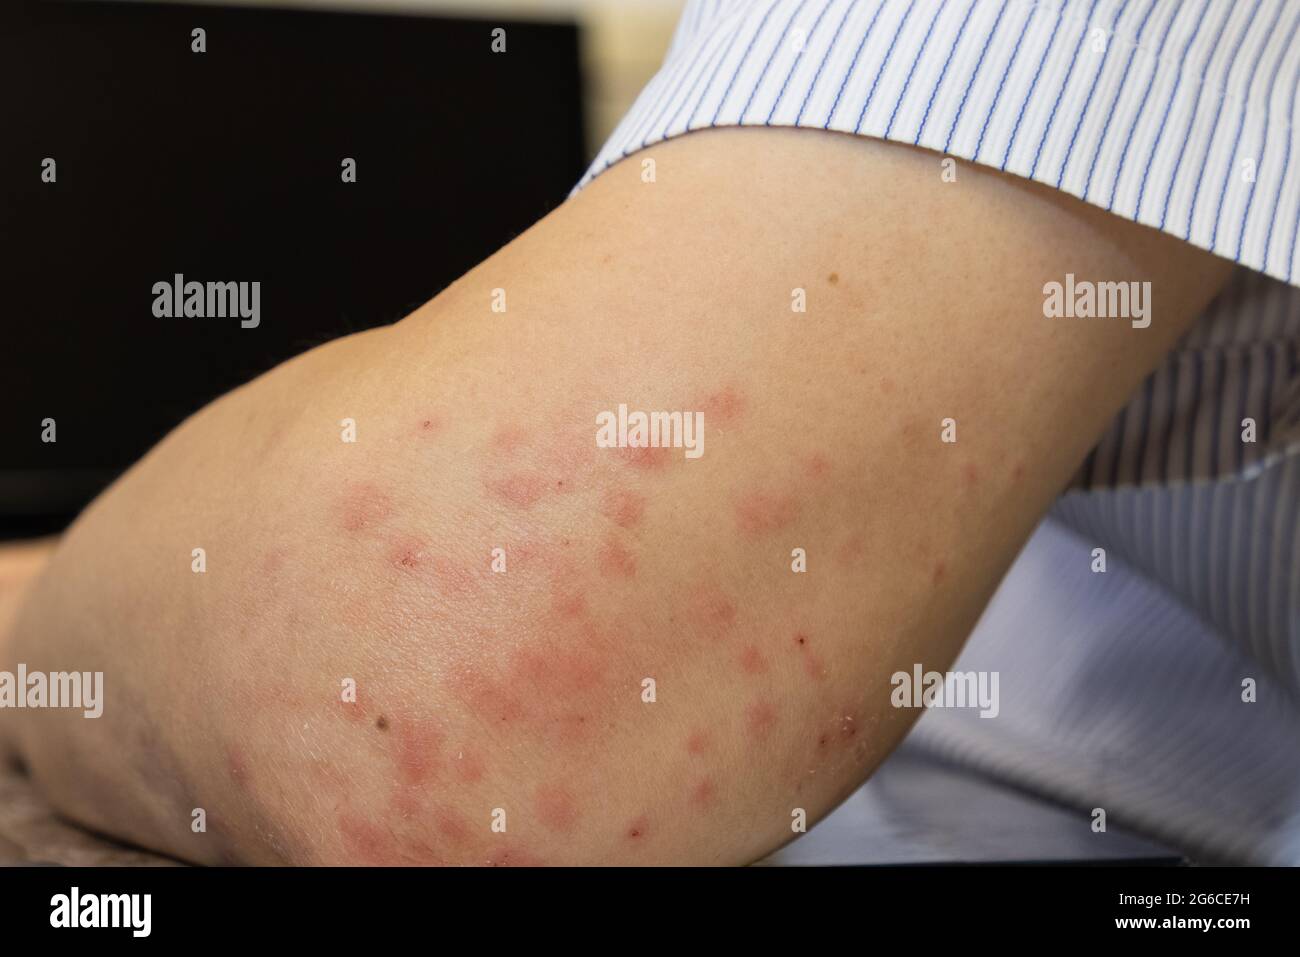 mosquito bits skin of man's elbow, creating a large area of bump, itching, swelling, soreness, and redness. hand cannot help scratching Stock Photo